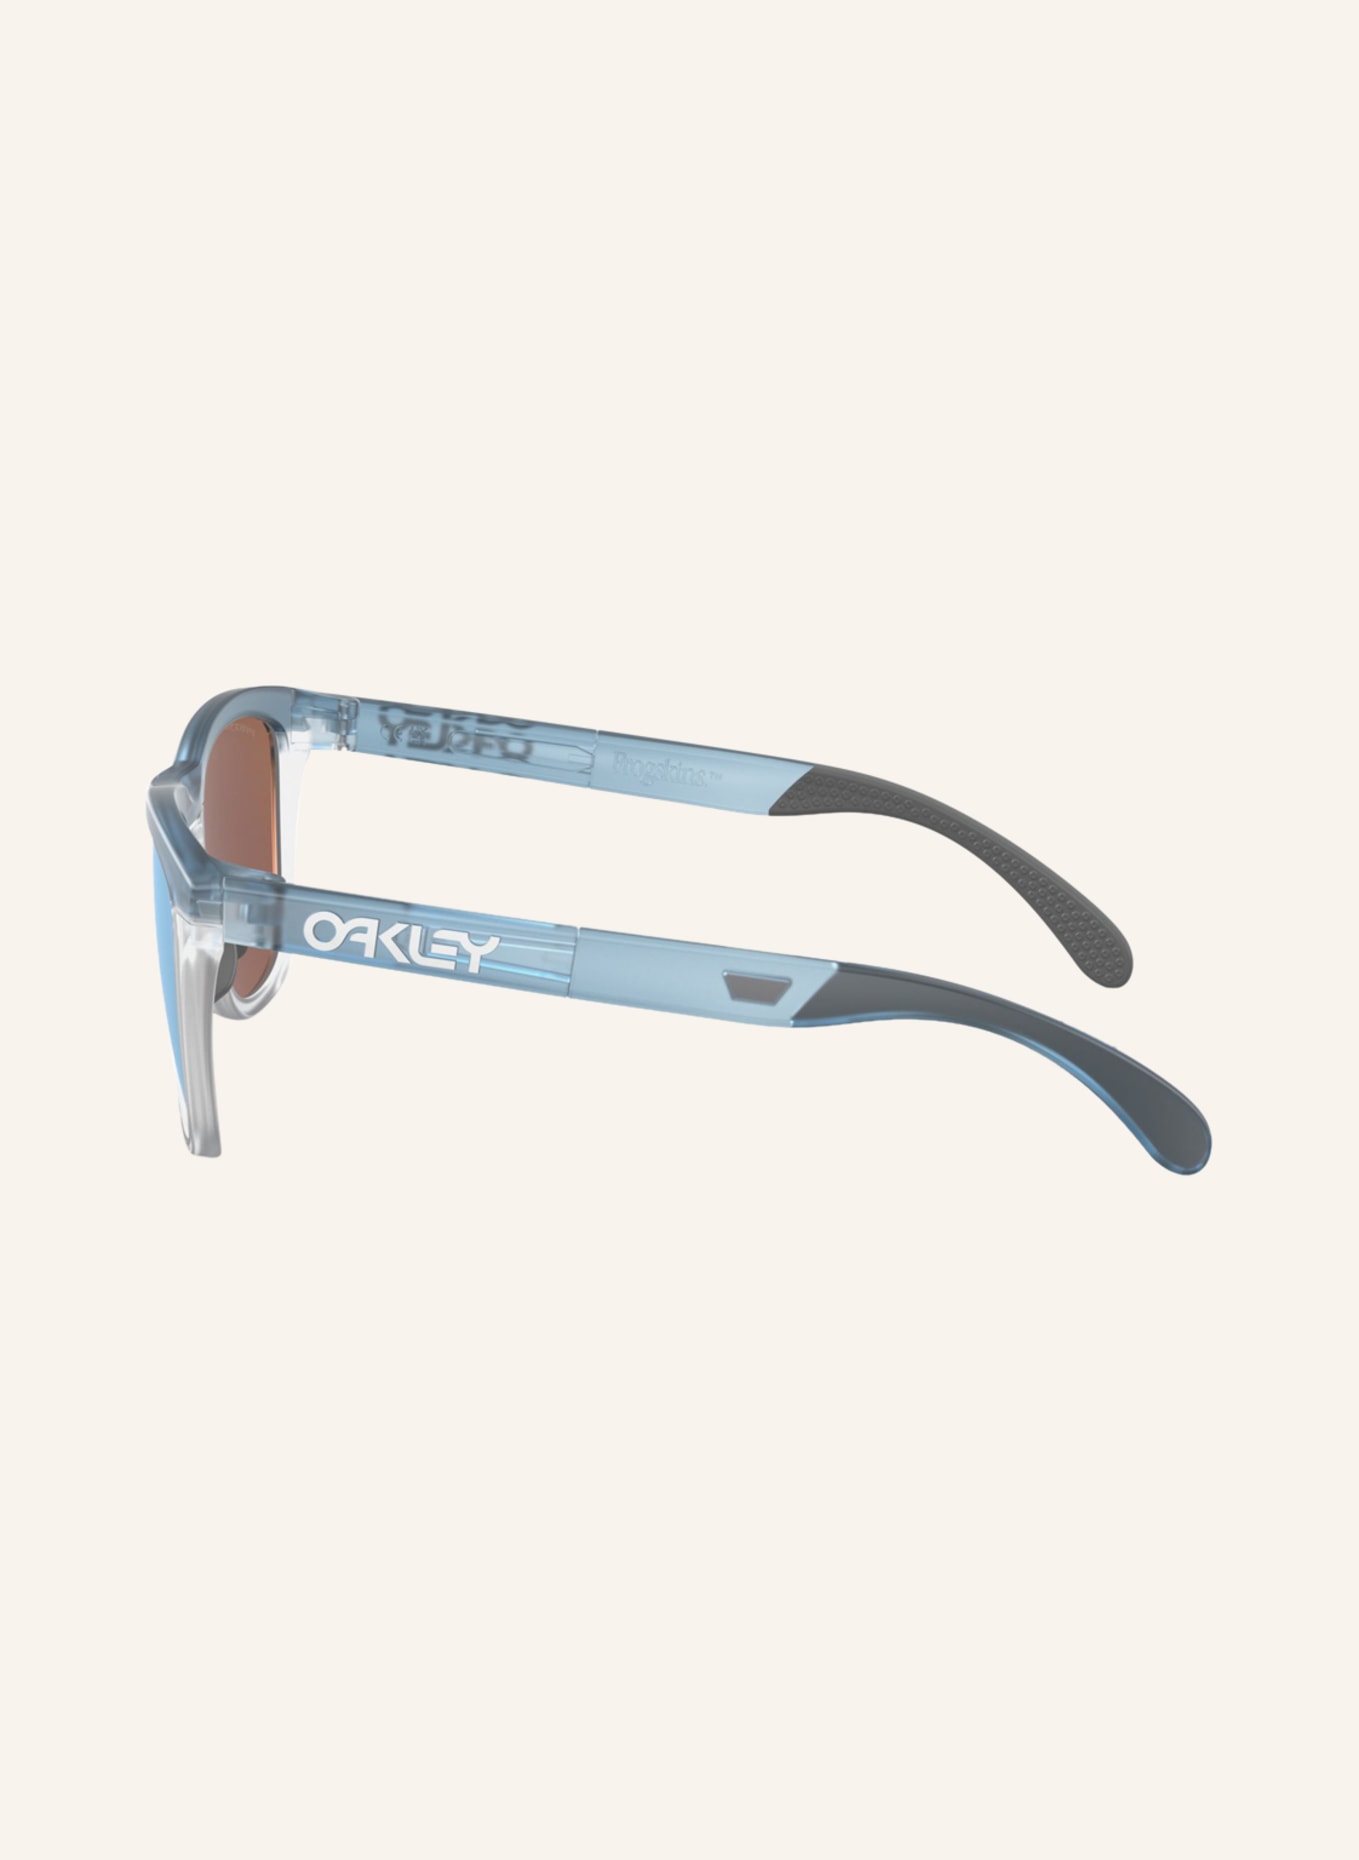 OAKLEY Sunglasses OO9284 FROGSKINS, Color: 928409 BLUE-GRAY/ PINK POLARIZED (Image 4)